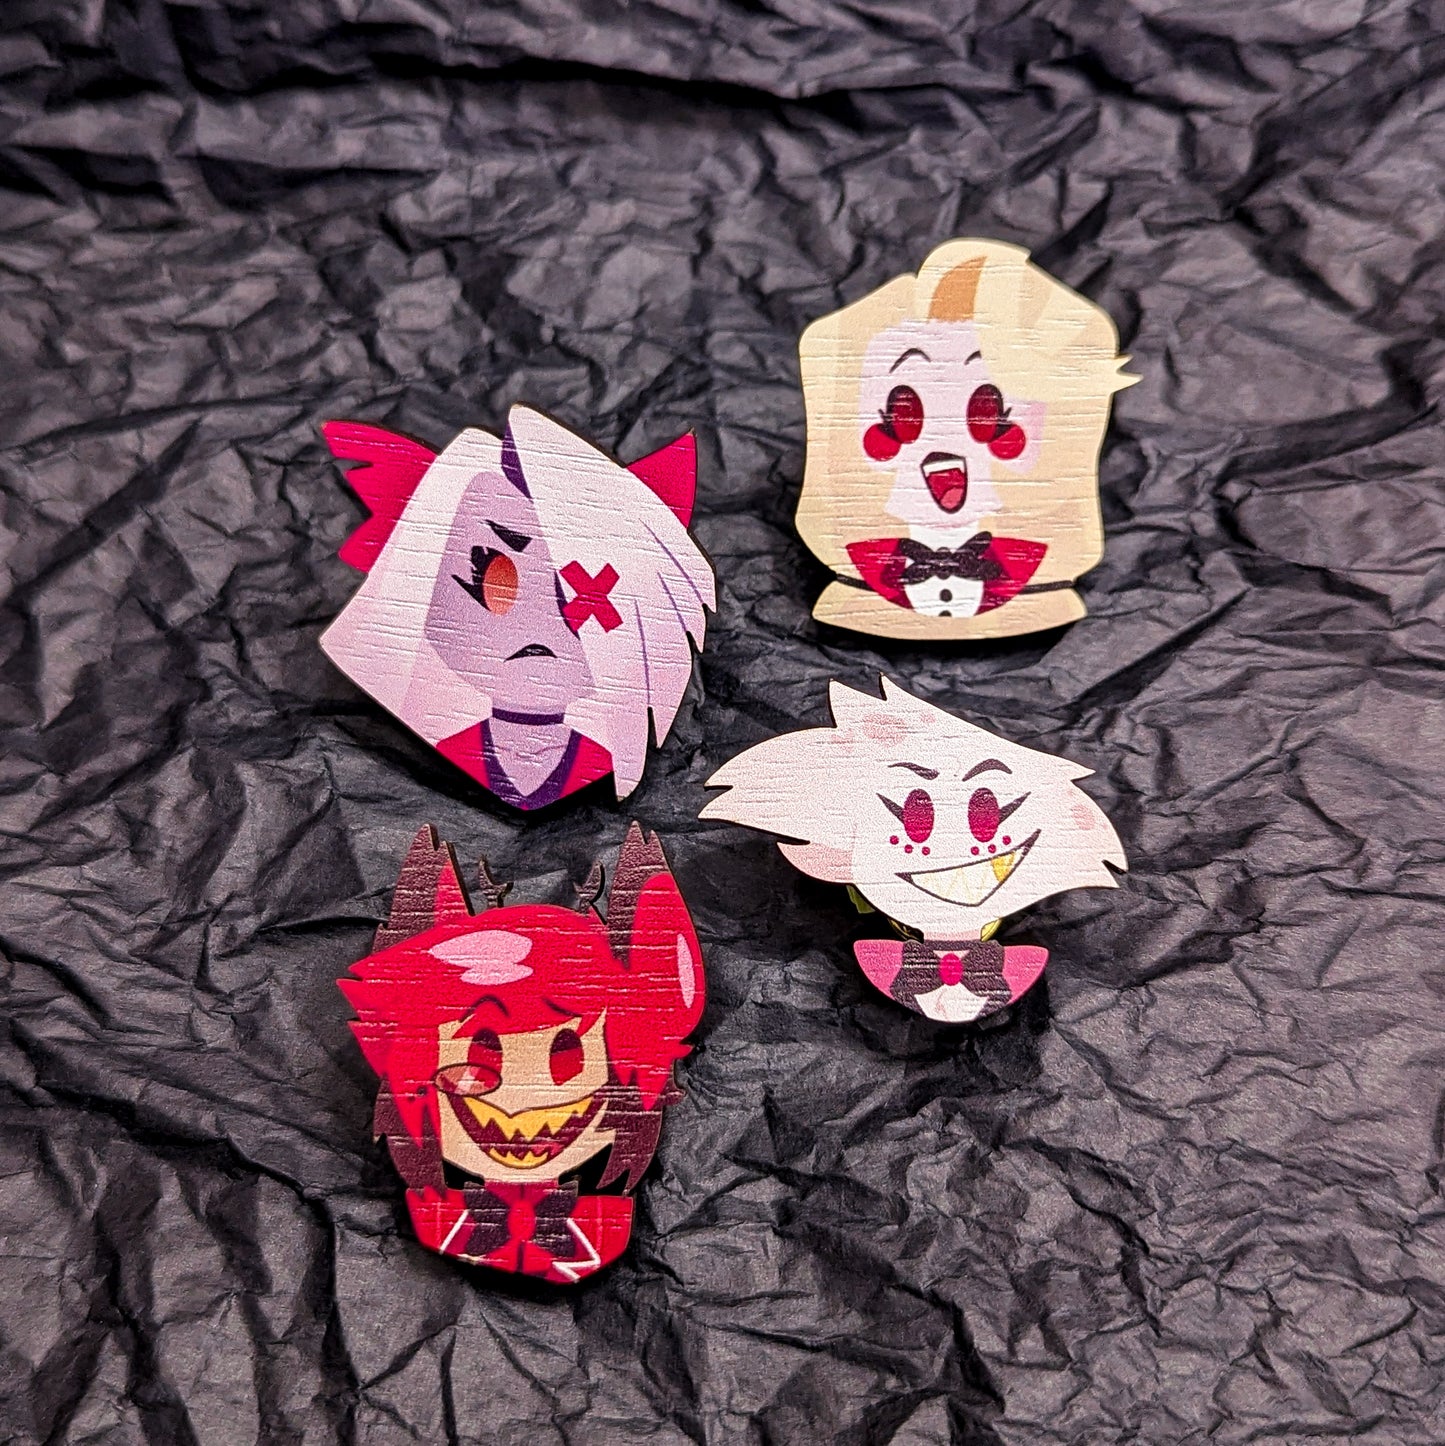 SINNERS AND CO - Hazbin Hotel Inspired Pins